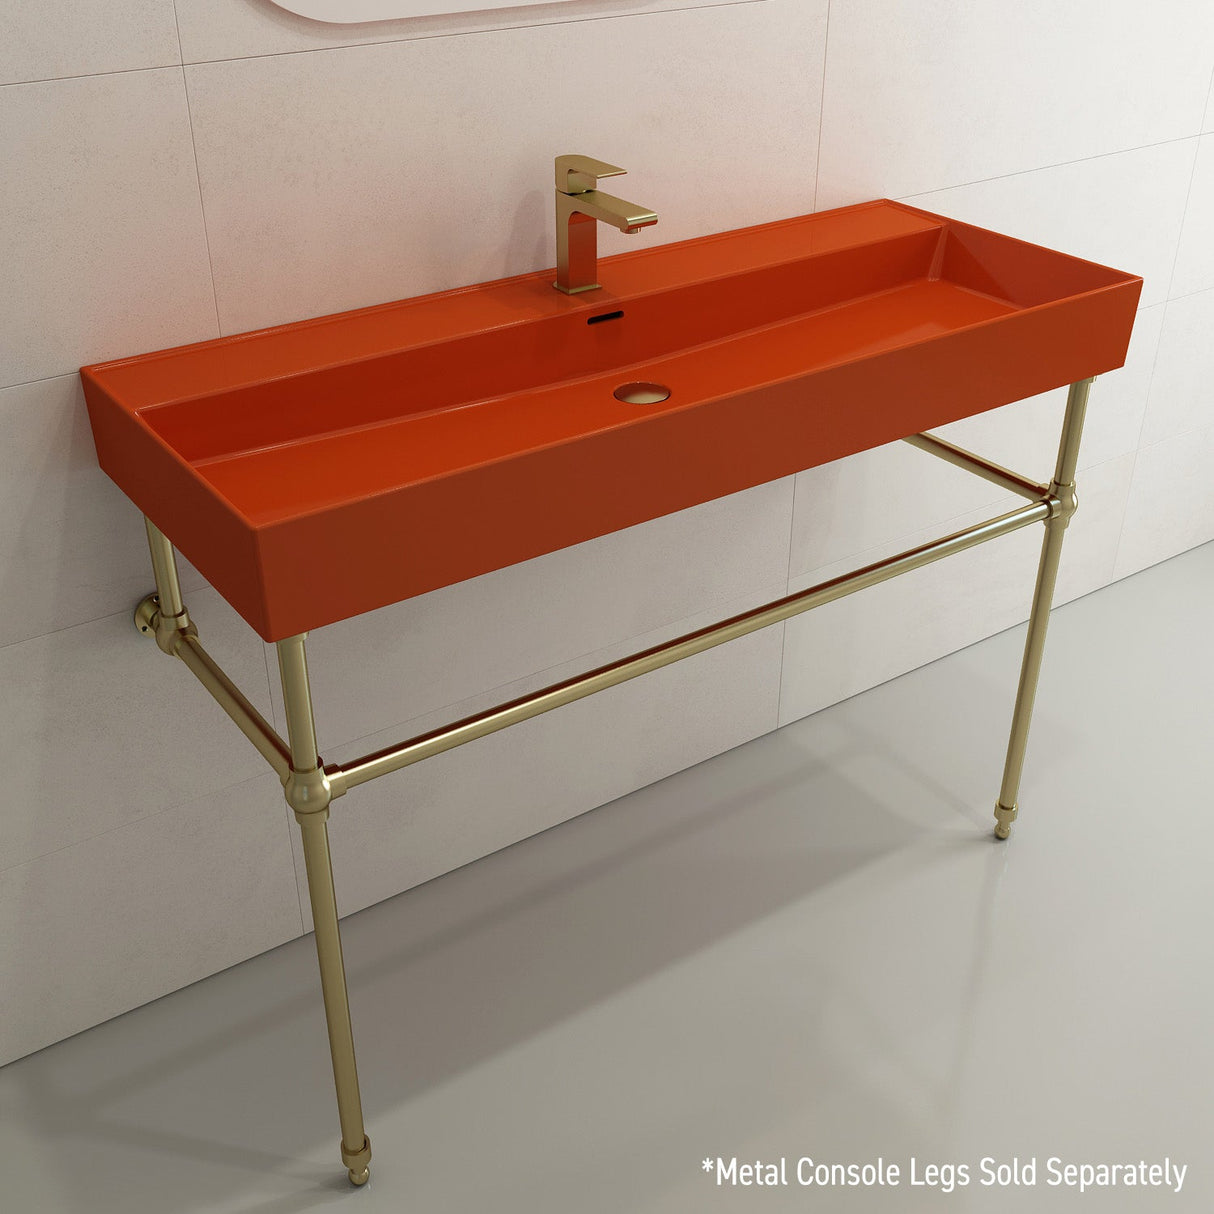 BOCCHI 1394-012-0126 Milano Wall-Mounted Sink Fireclay 47.75 in. 1-Hole with Overflow in Orange